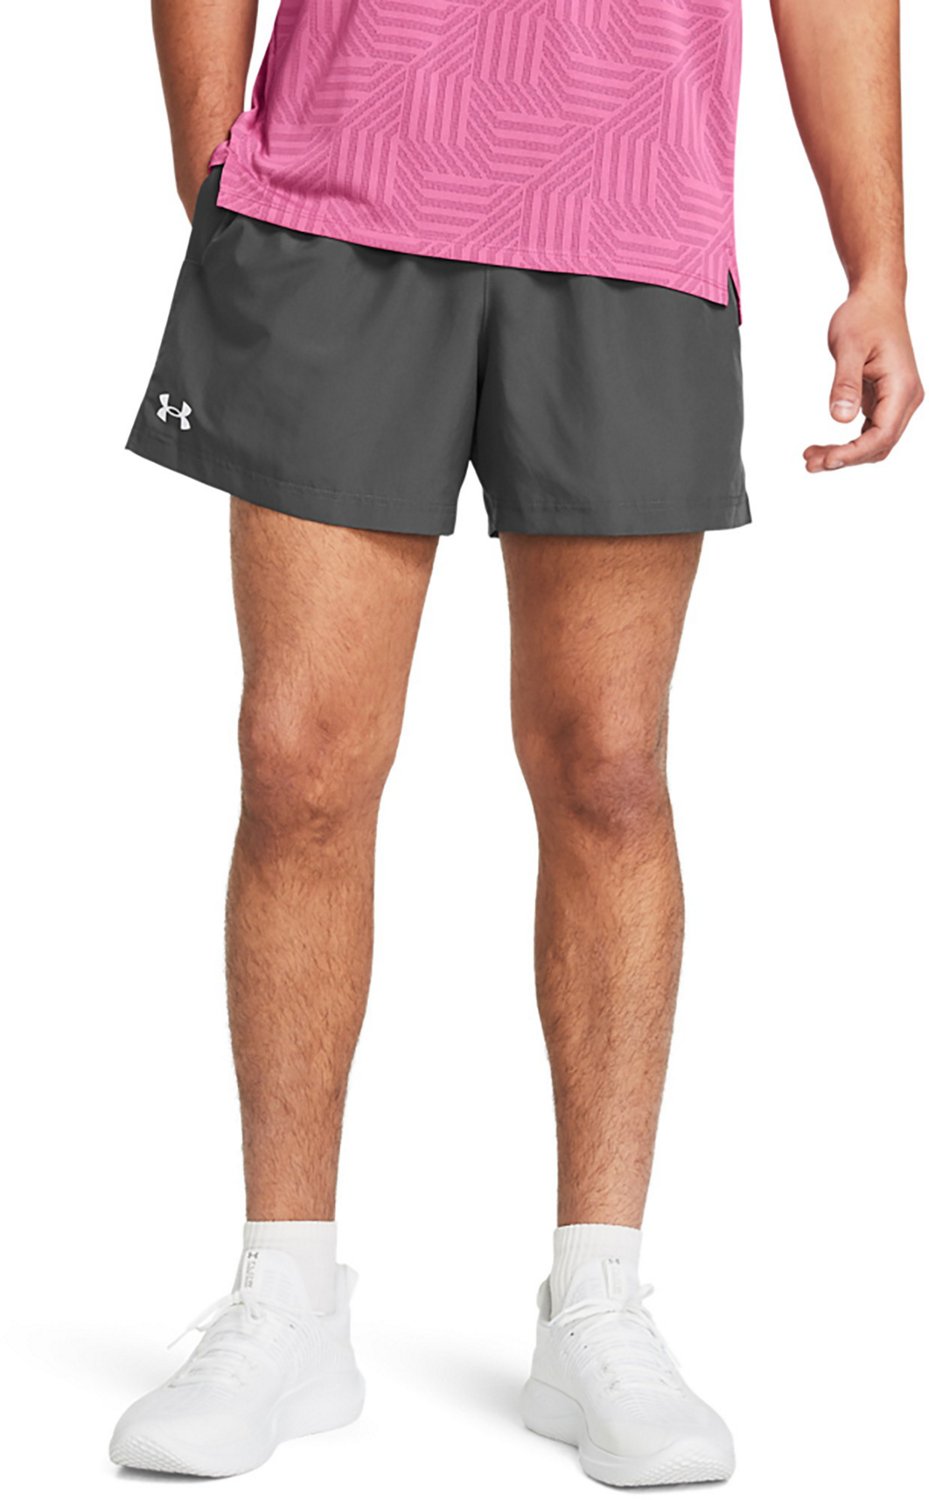 Under Armour Men's Woven Shorts 5 in